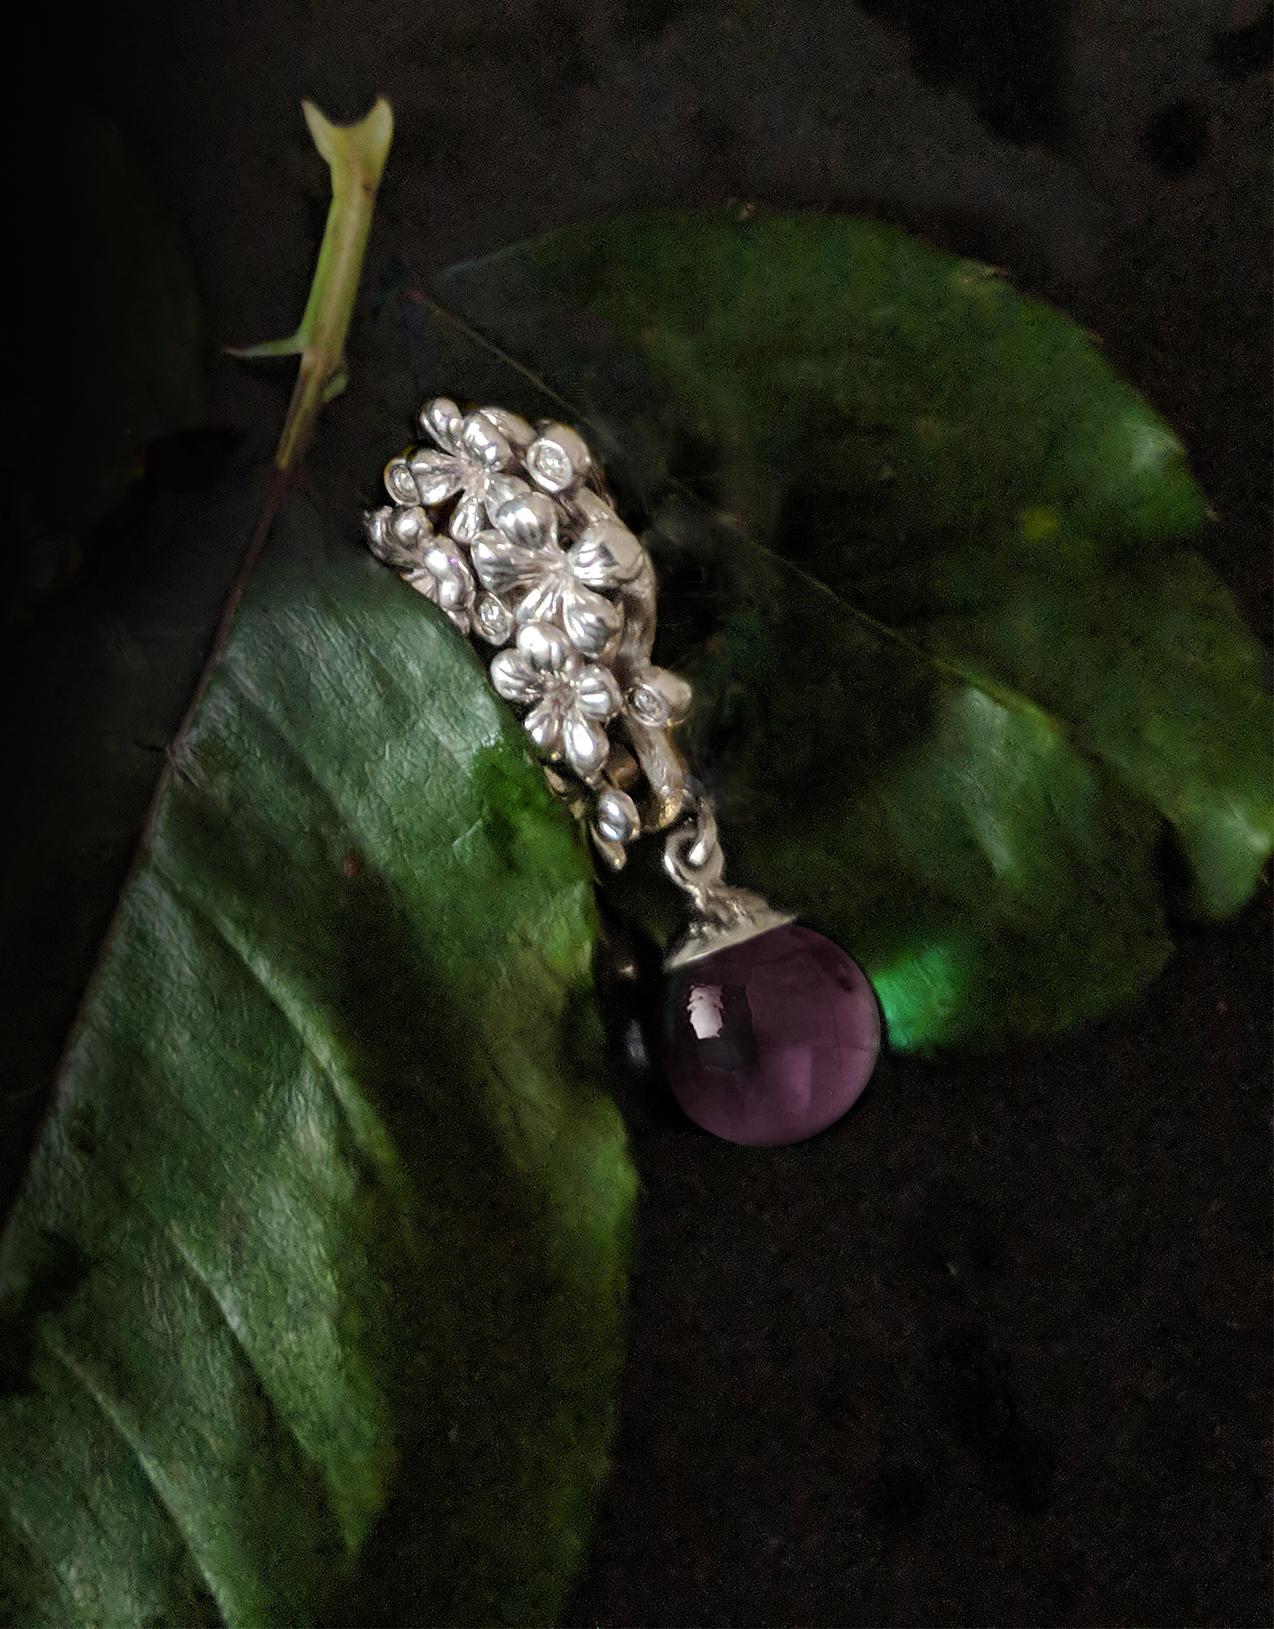 The 14 karat white gold Plum Blossom contemporary pendant necklace is encrusted with five round diamonds and a cabochon rose quartz drop, and has been featured in a review by Vogue UA. We use only top-quality natural diamonds of VS clarity and F-G